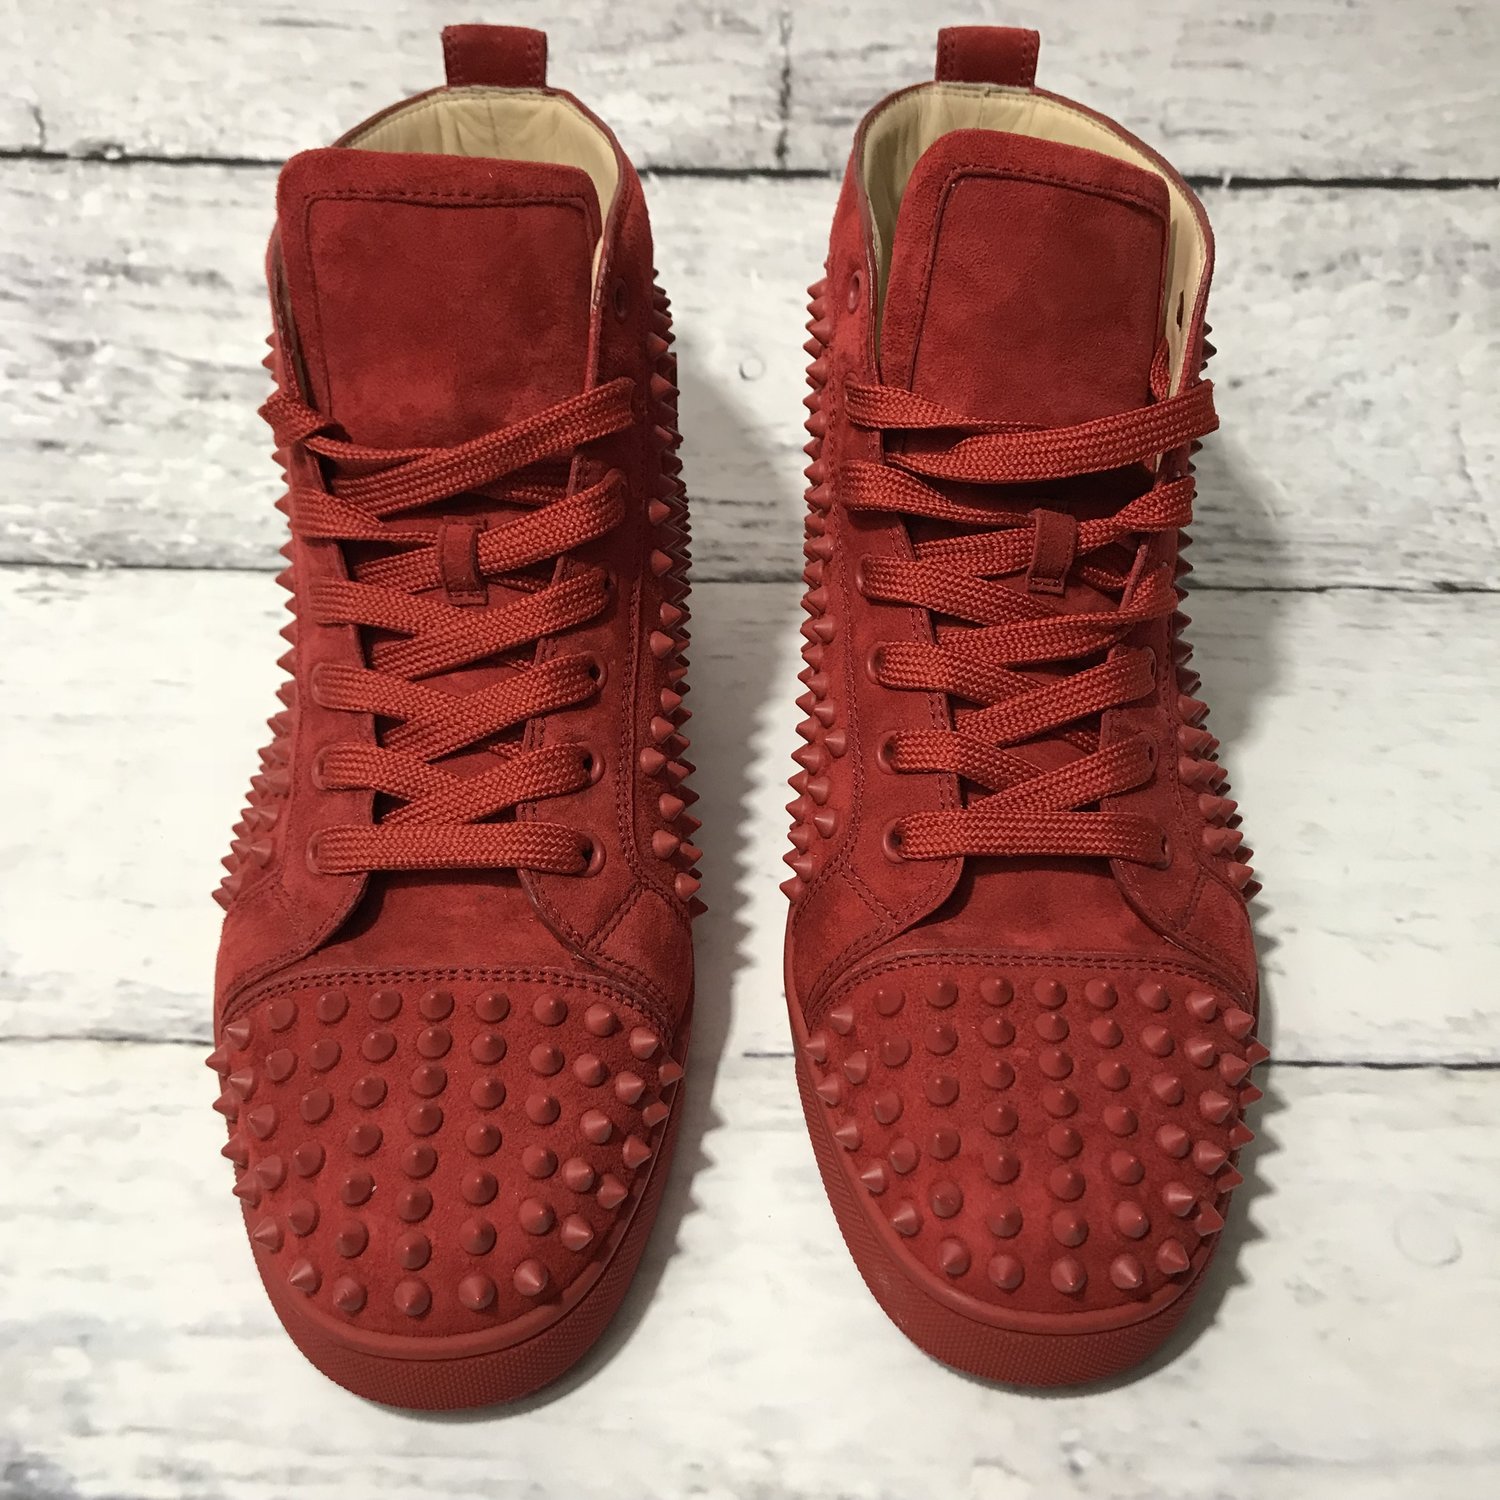 Christian Louboutin red suede spiked sneakers (43) — REBOUND JUNKIE